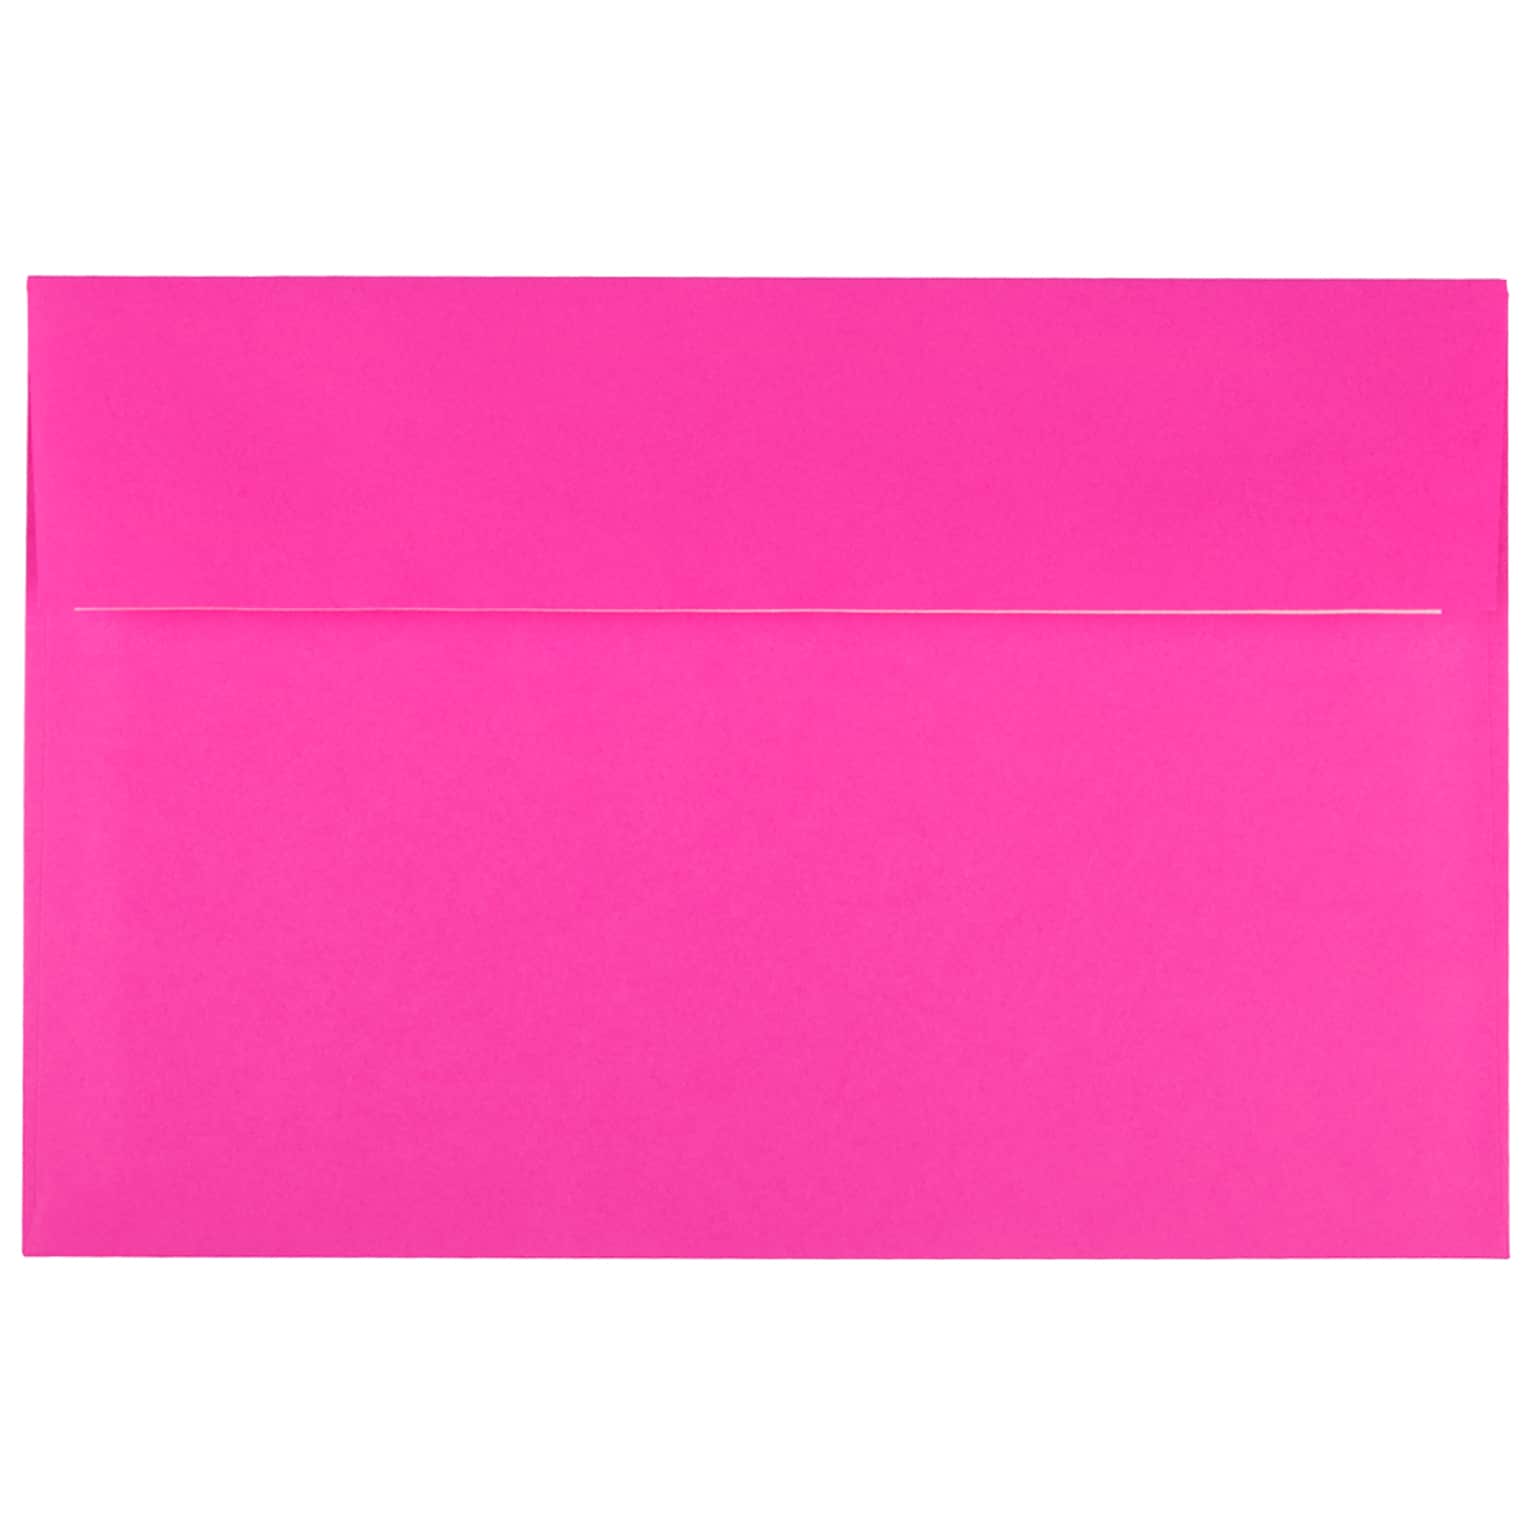 JAM Paper A9 Invitation Envelopes with Peel & Seal Closure, 5 3/4 x 8 3/4, Ultra Fuchsia Hot Pink, 100/Pack (241137097)